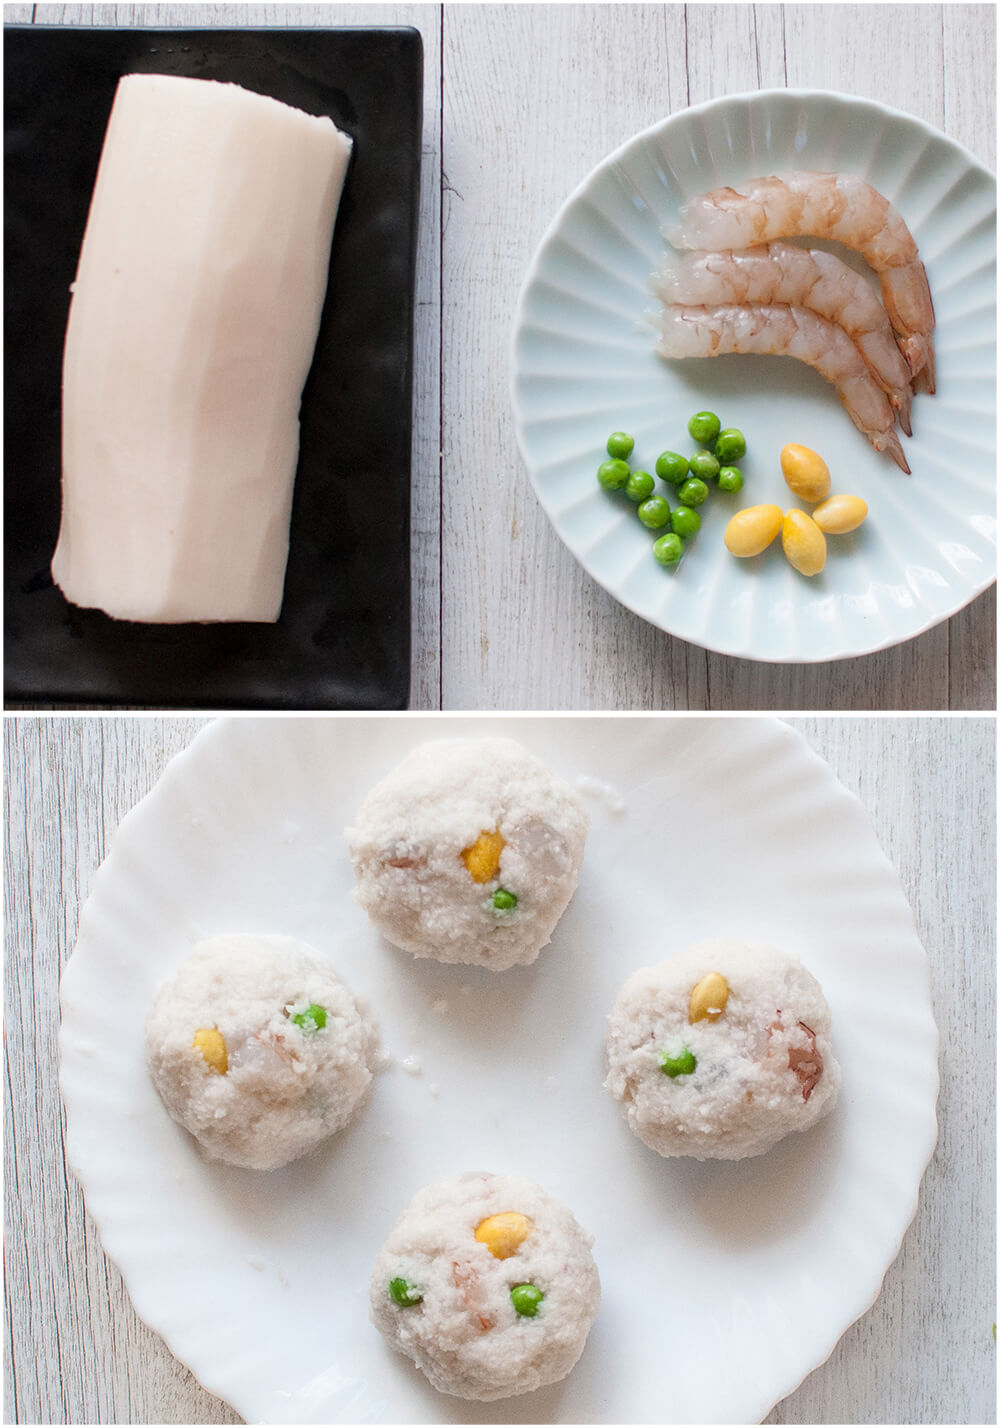 This is an elegant looking dish suitable as an appetiser or a side dish. Steamed lotus root balls are made of grated lotus roots mixed with prawns (shrimps), gingko nuts and green peas.